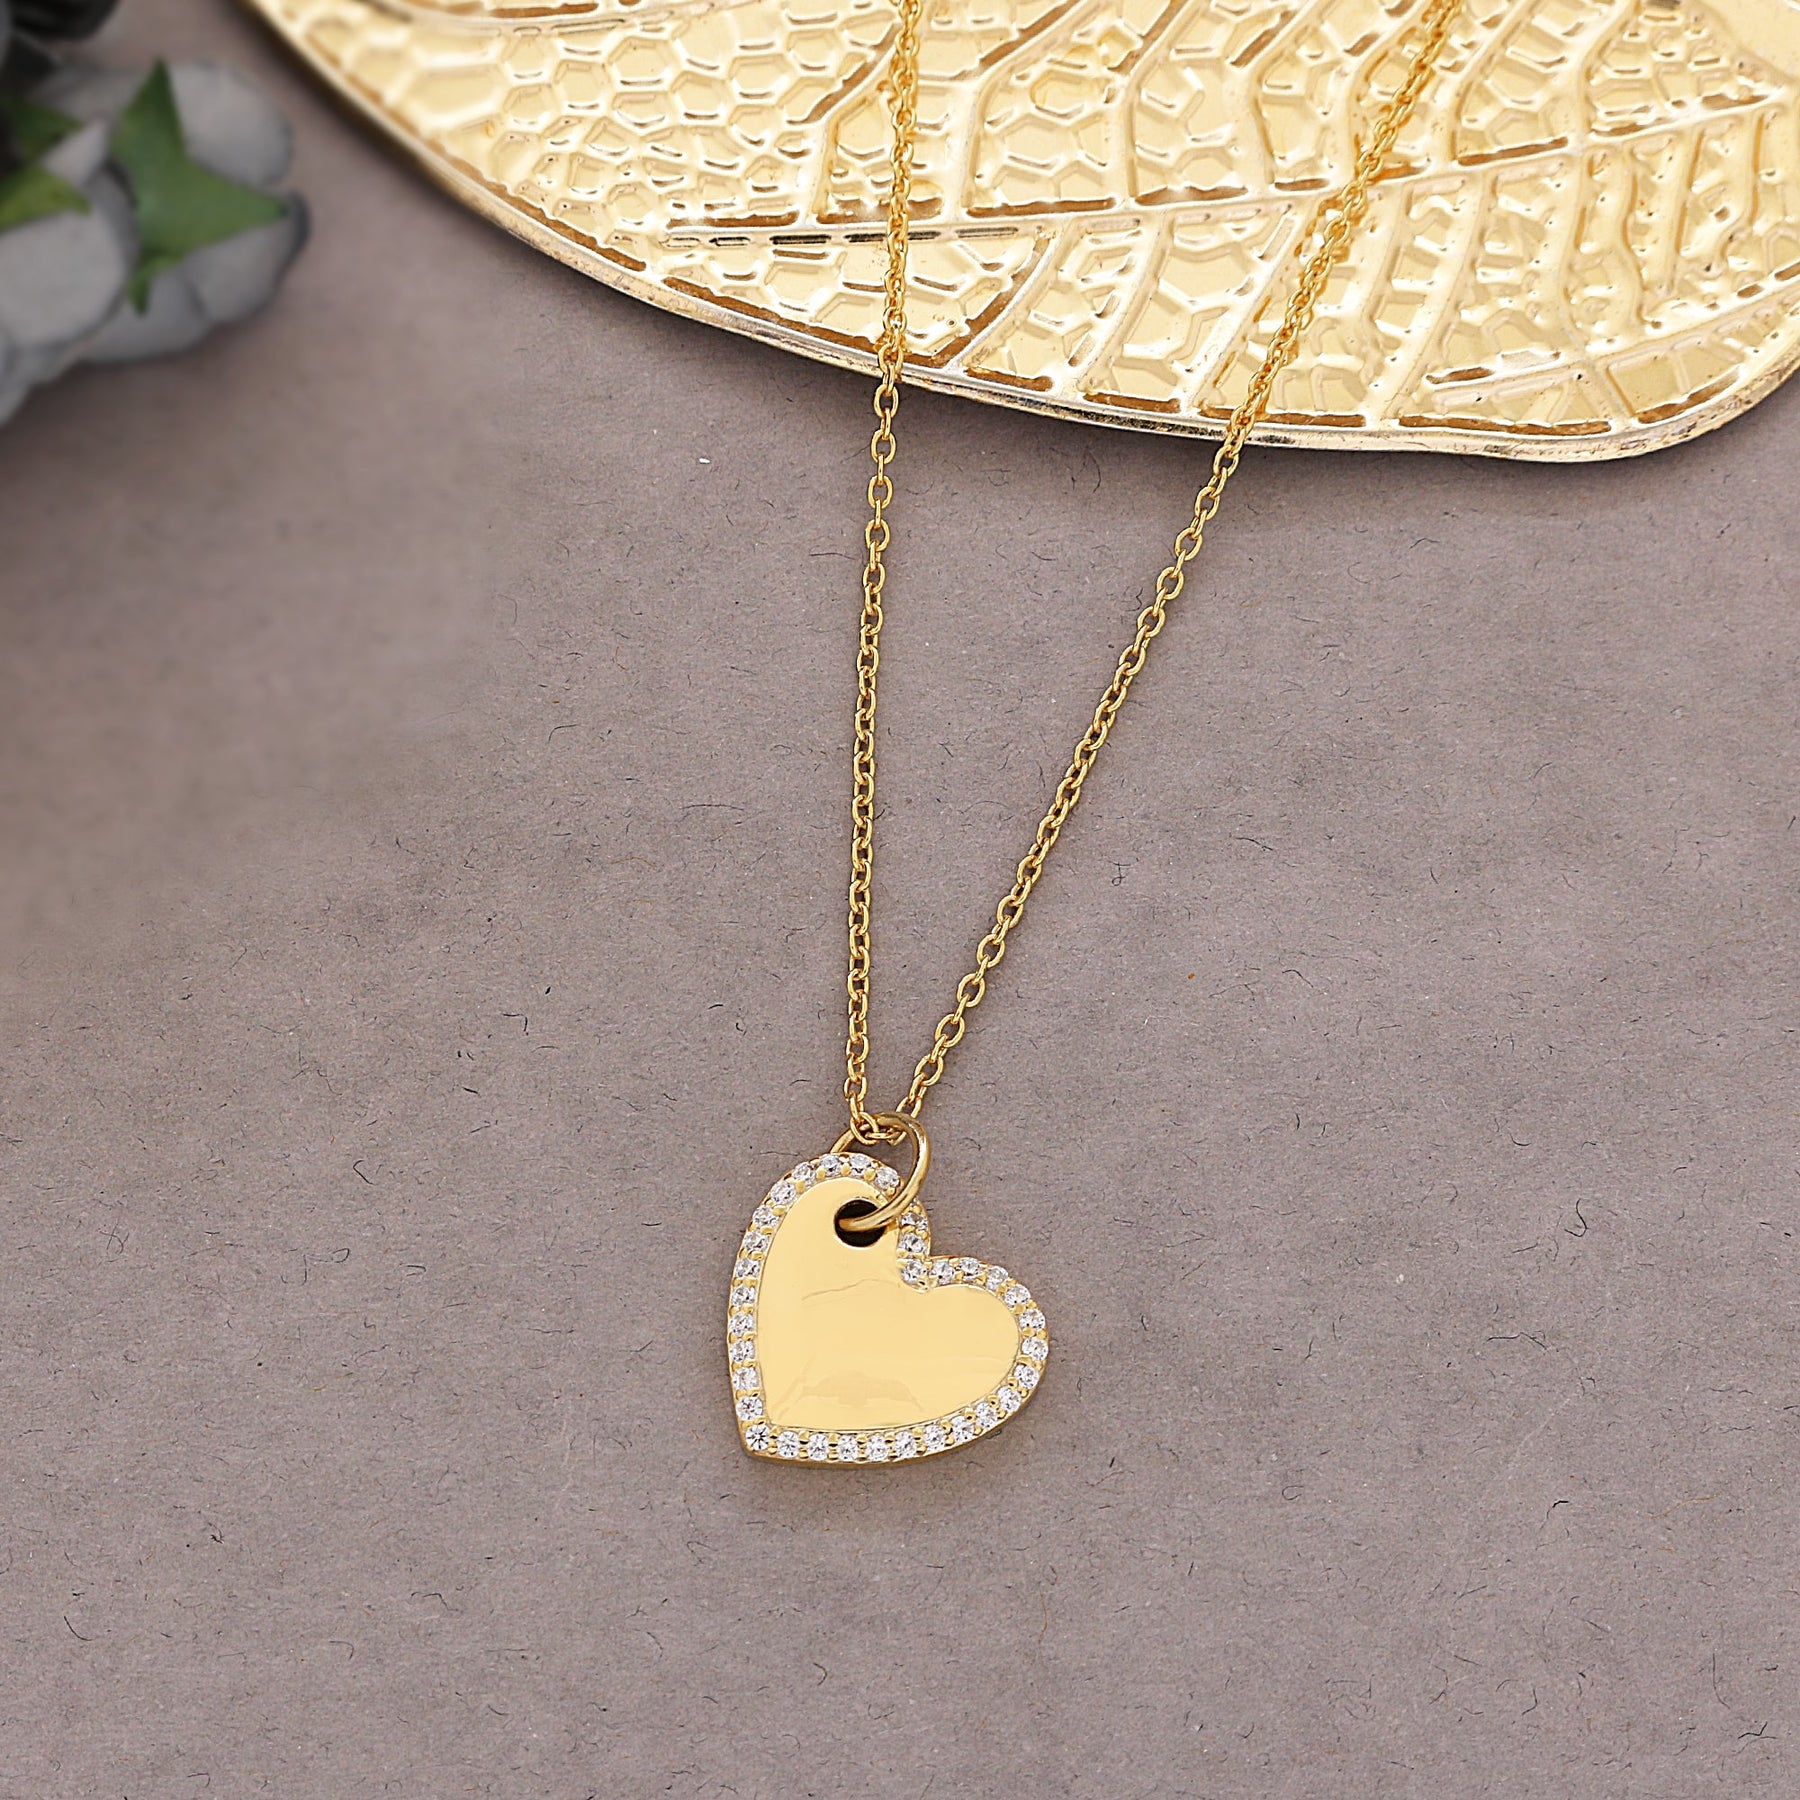 Grá Love Heart Necklace | Rudies and Co